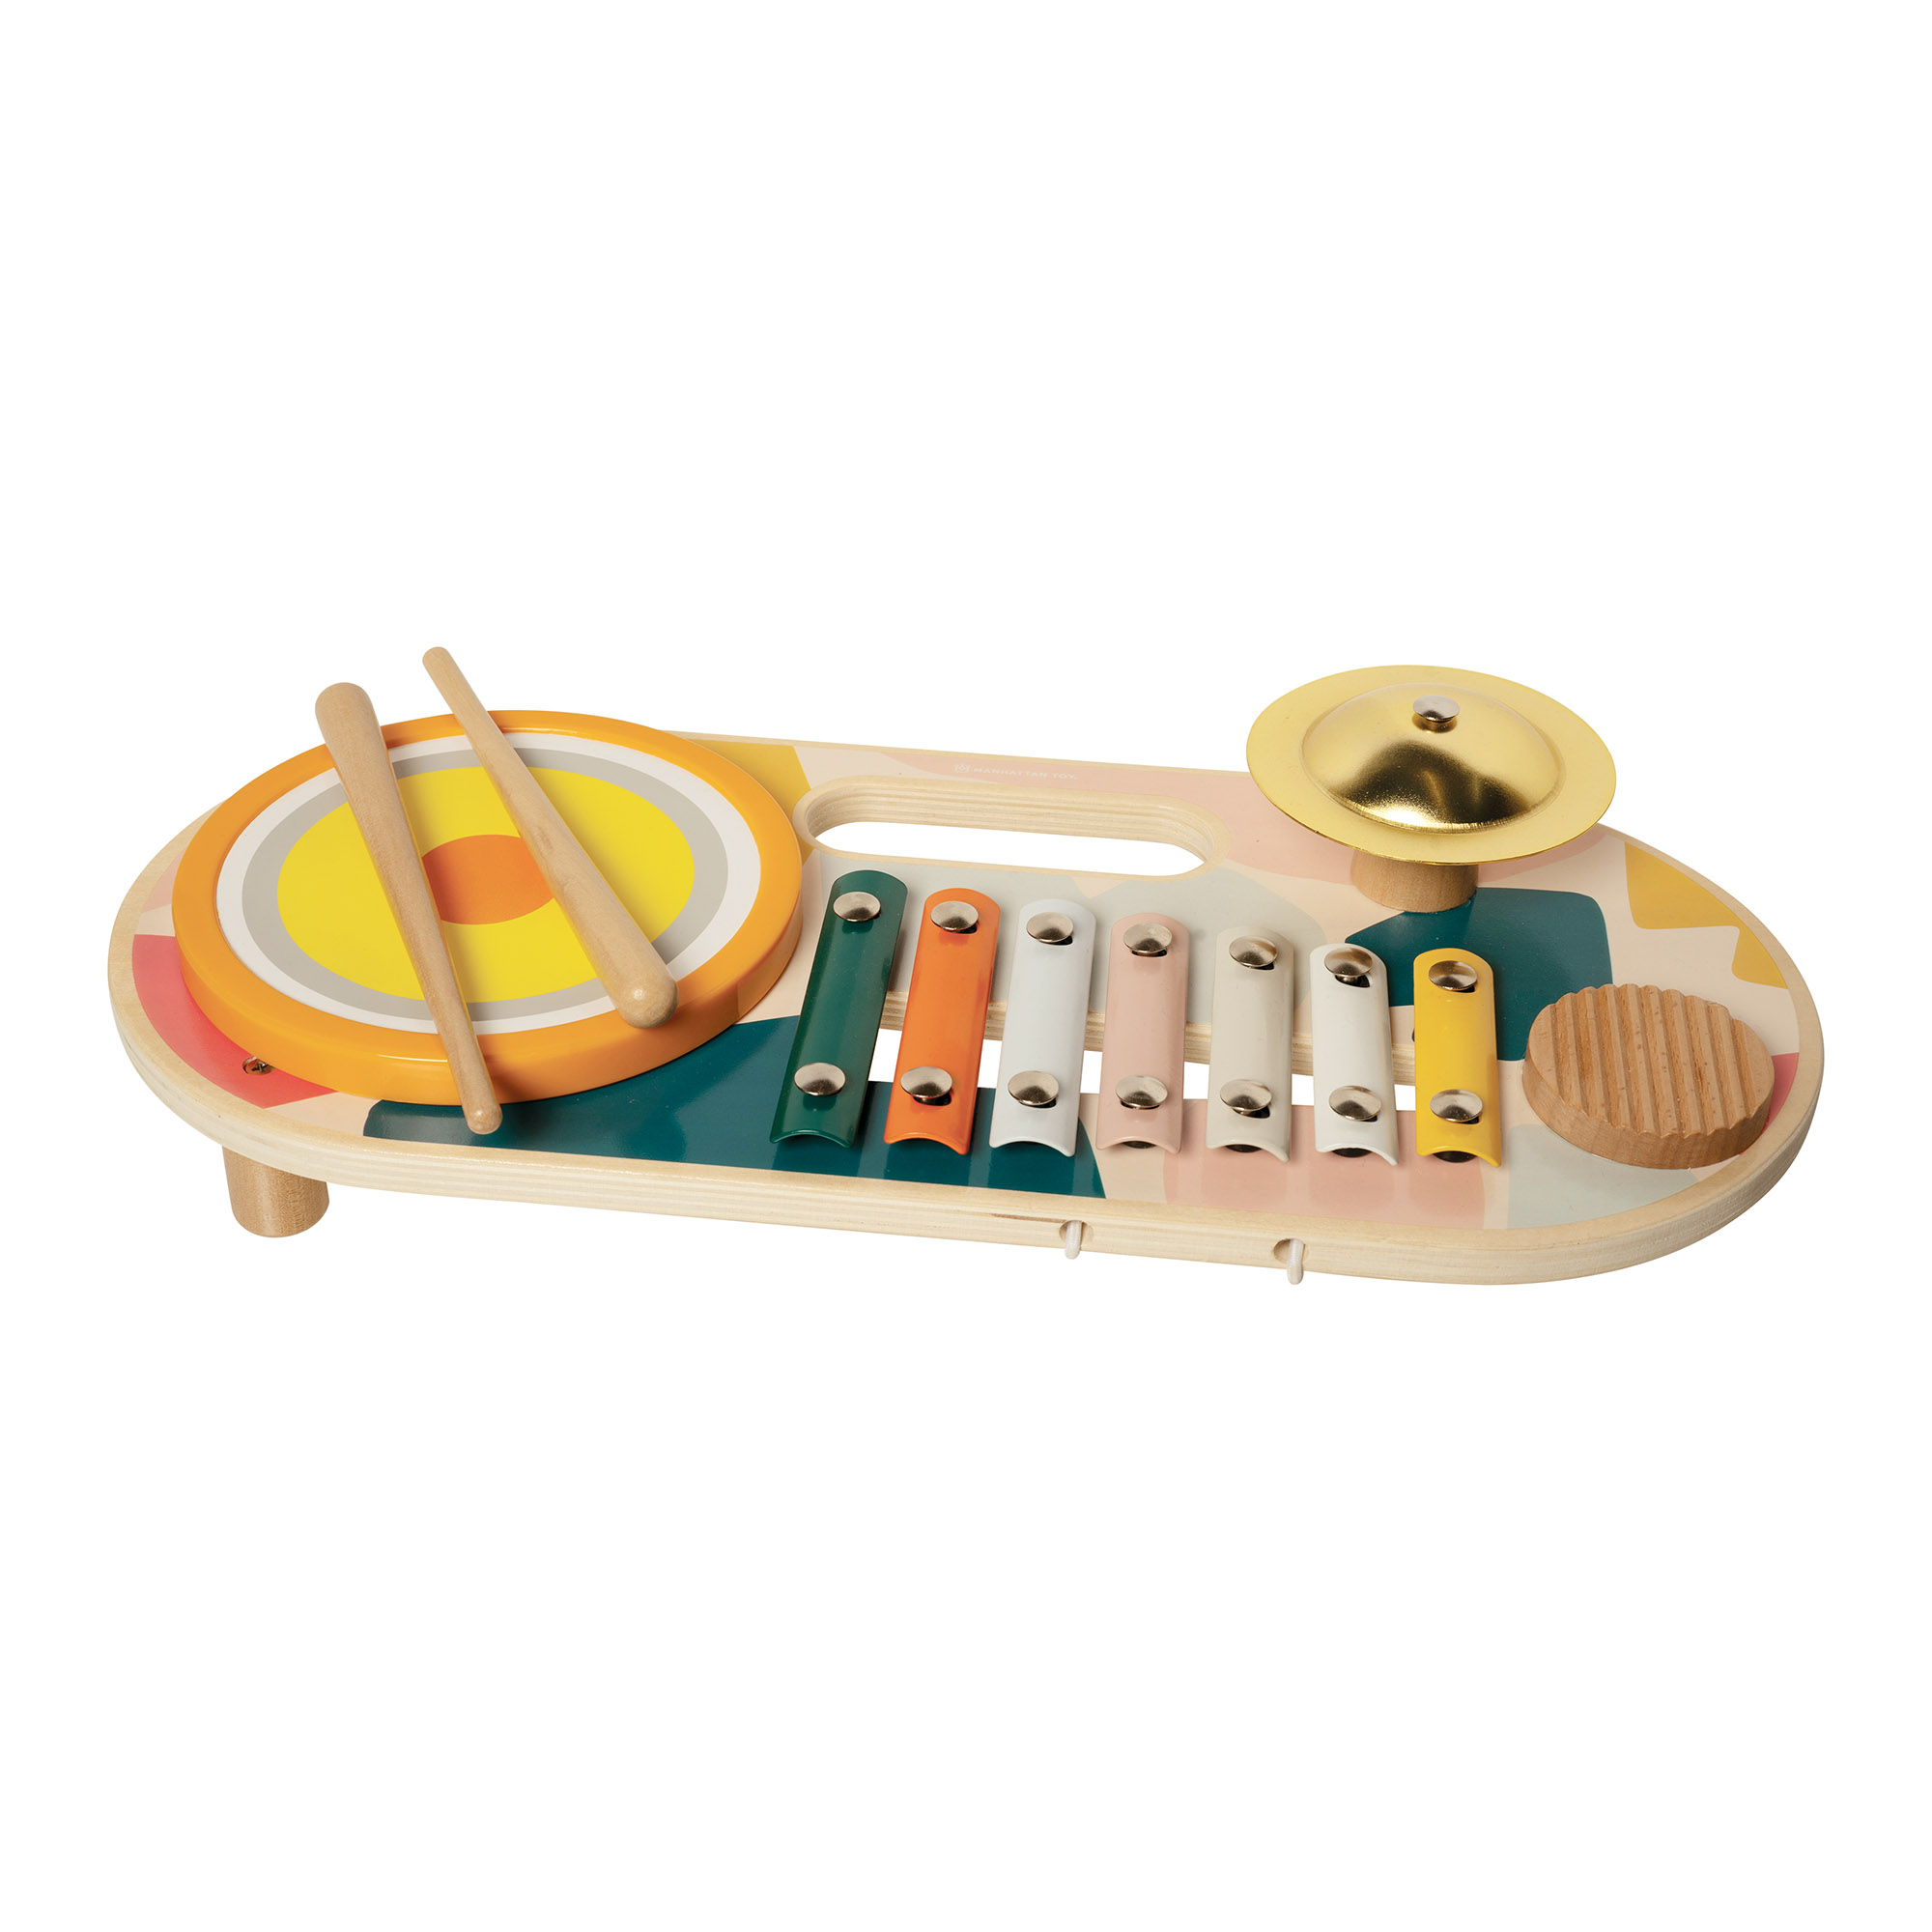 Manhattan Toy Beats to Go Wooden Toddler and Preschool Musical Learning Toy Xylophone, Drum, Cymbal and Washboard - image 3 of 8